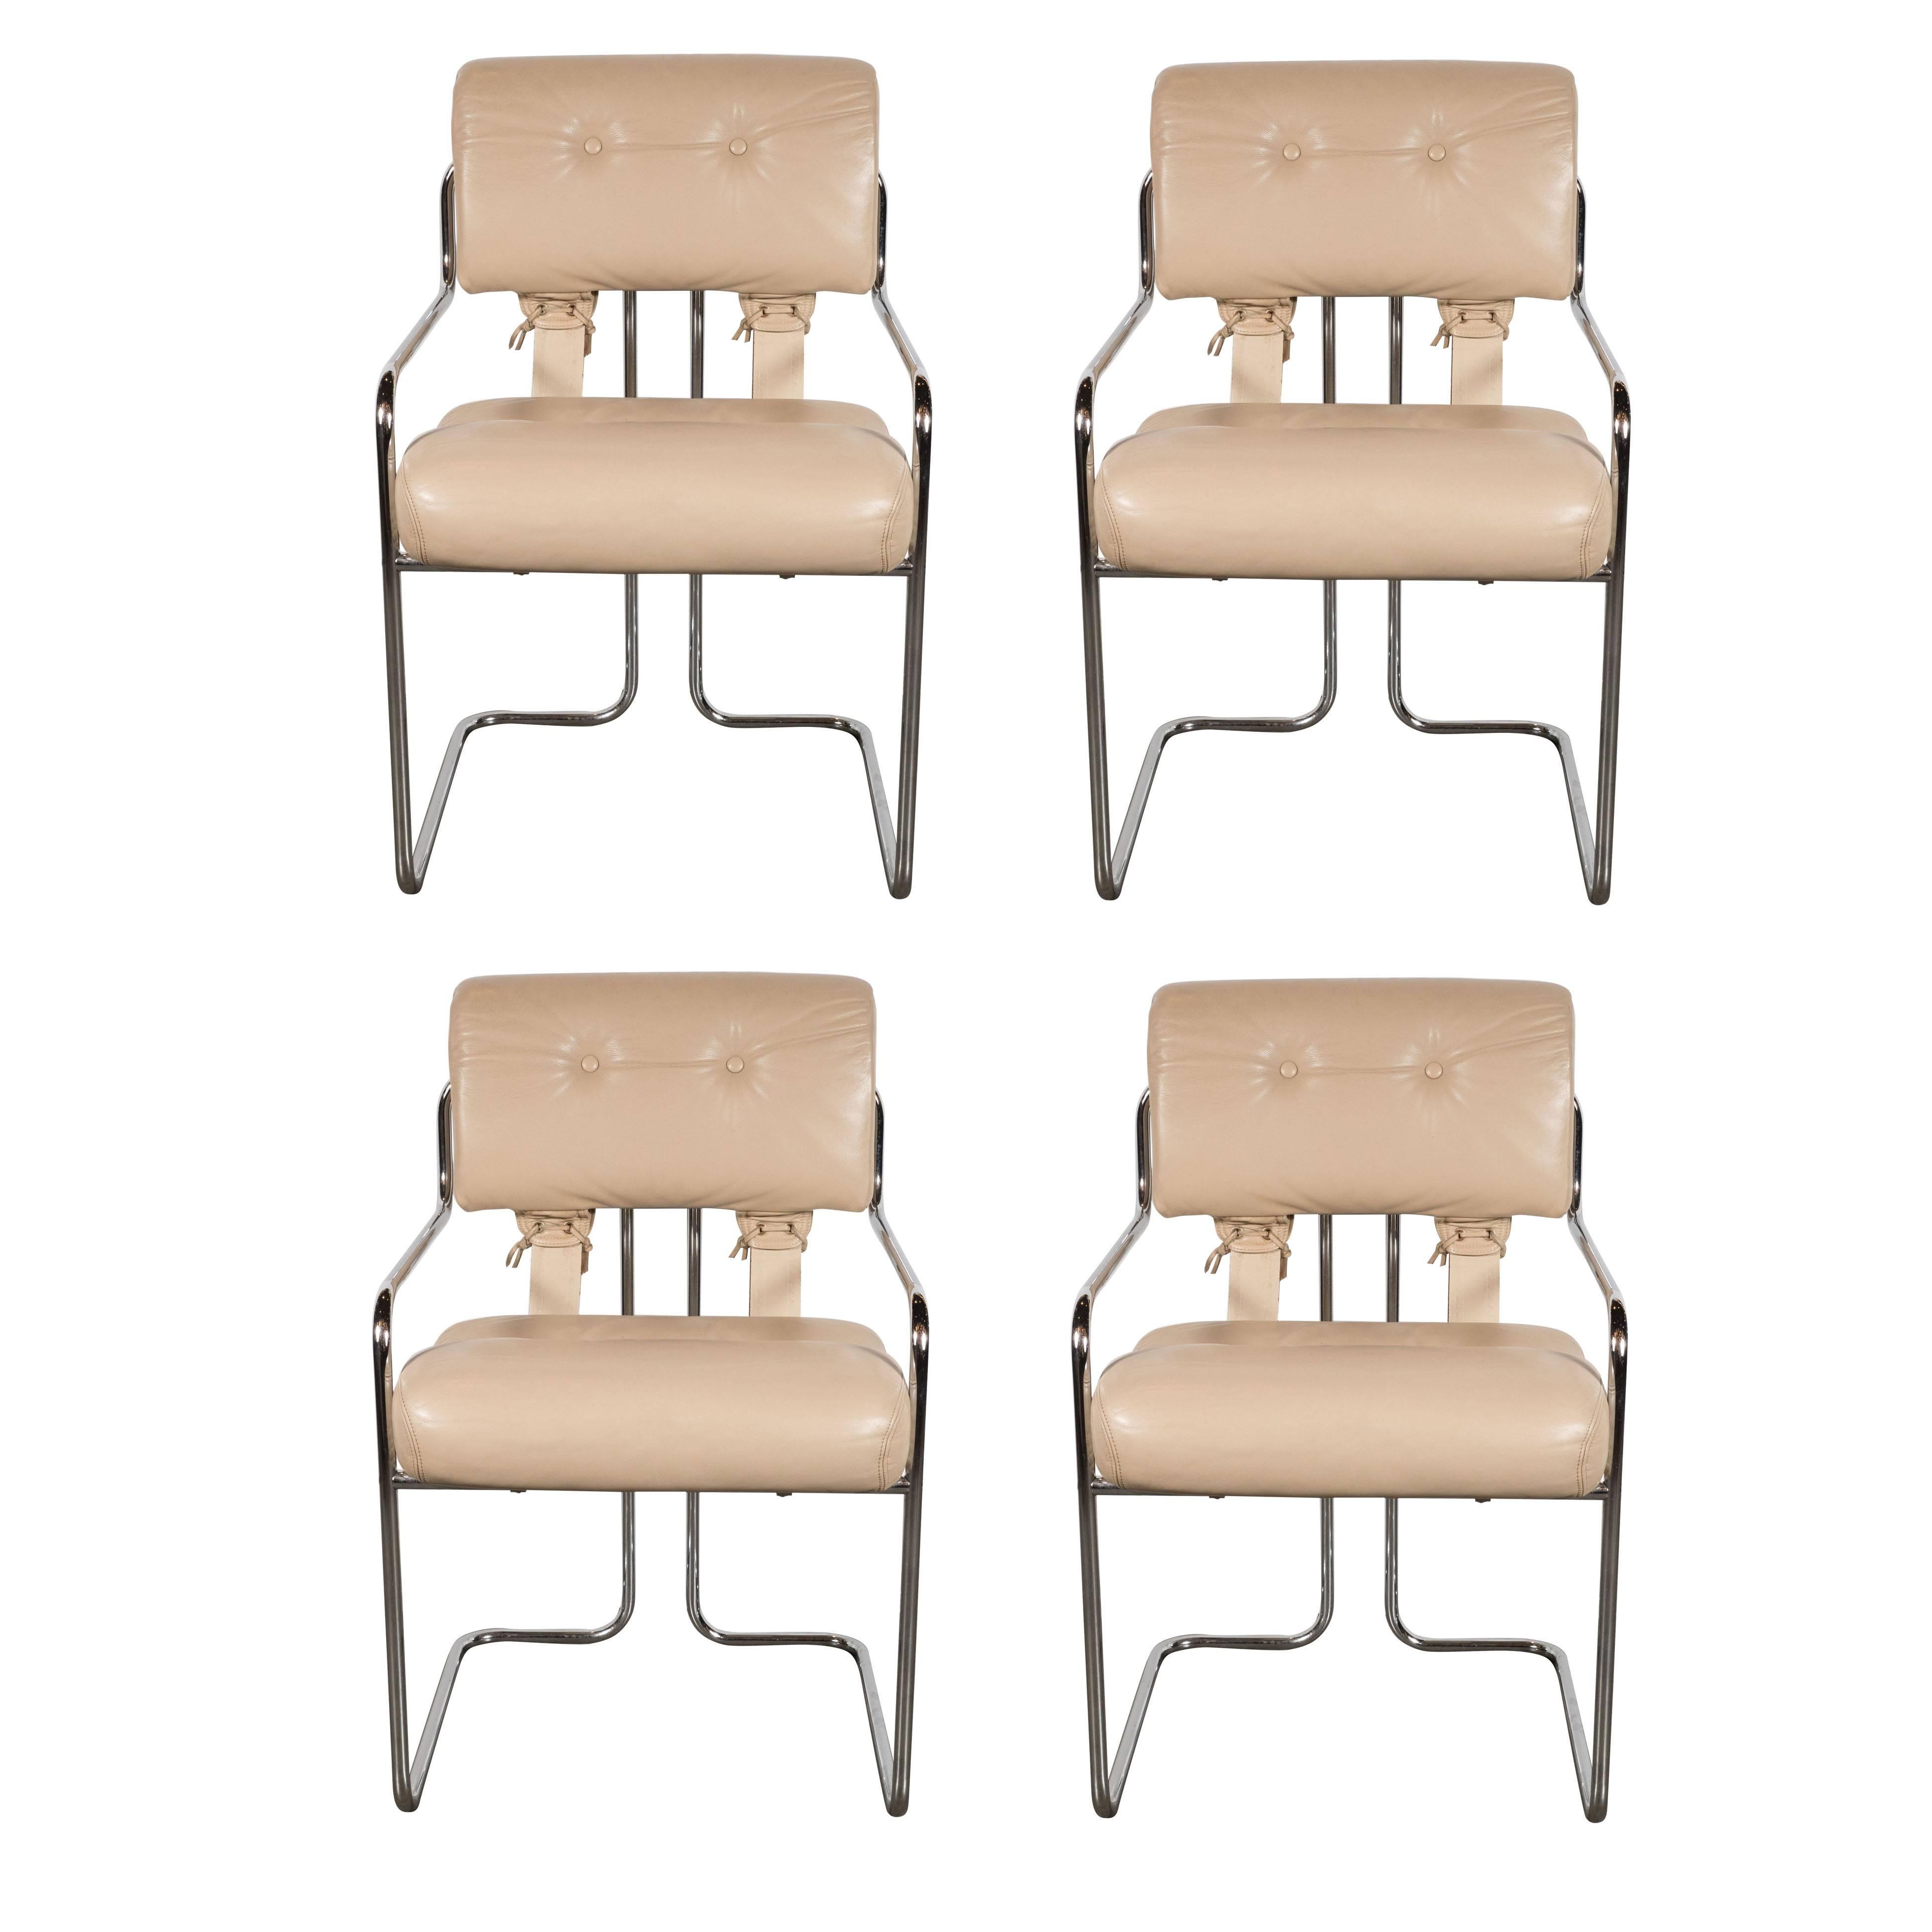 Set of four Mid-Century Modernist dining chairs by Guido Faleschini by Mariani for Pace Collection. Tubular bent steel frames support button-tufted leather upholstered seats and backs. They are fastened in the back with leather saddle-stitch. The